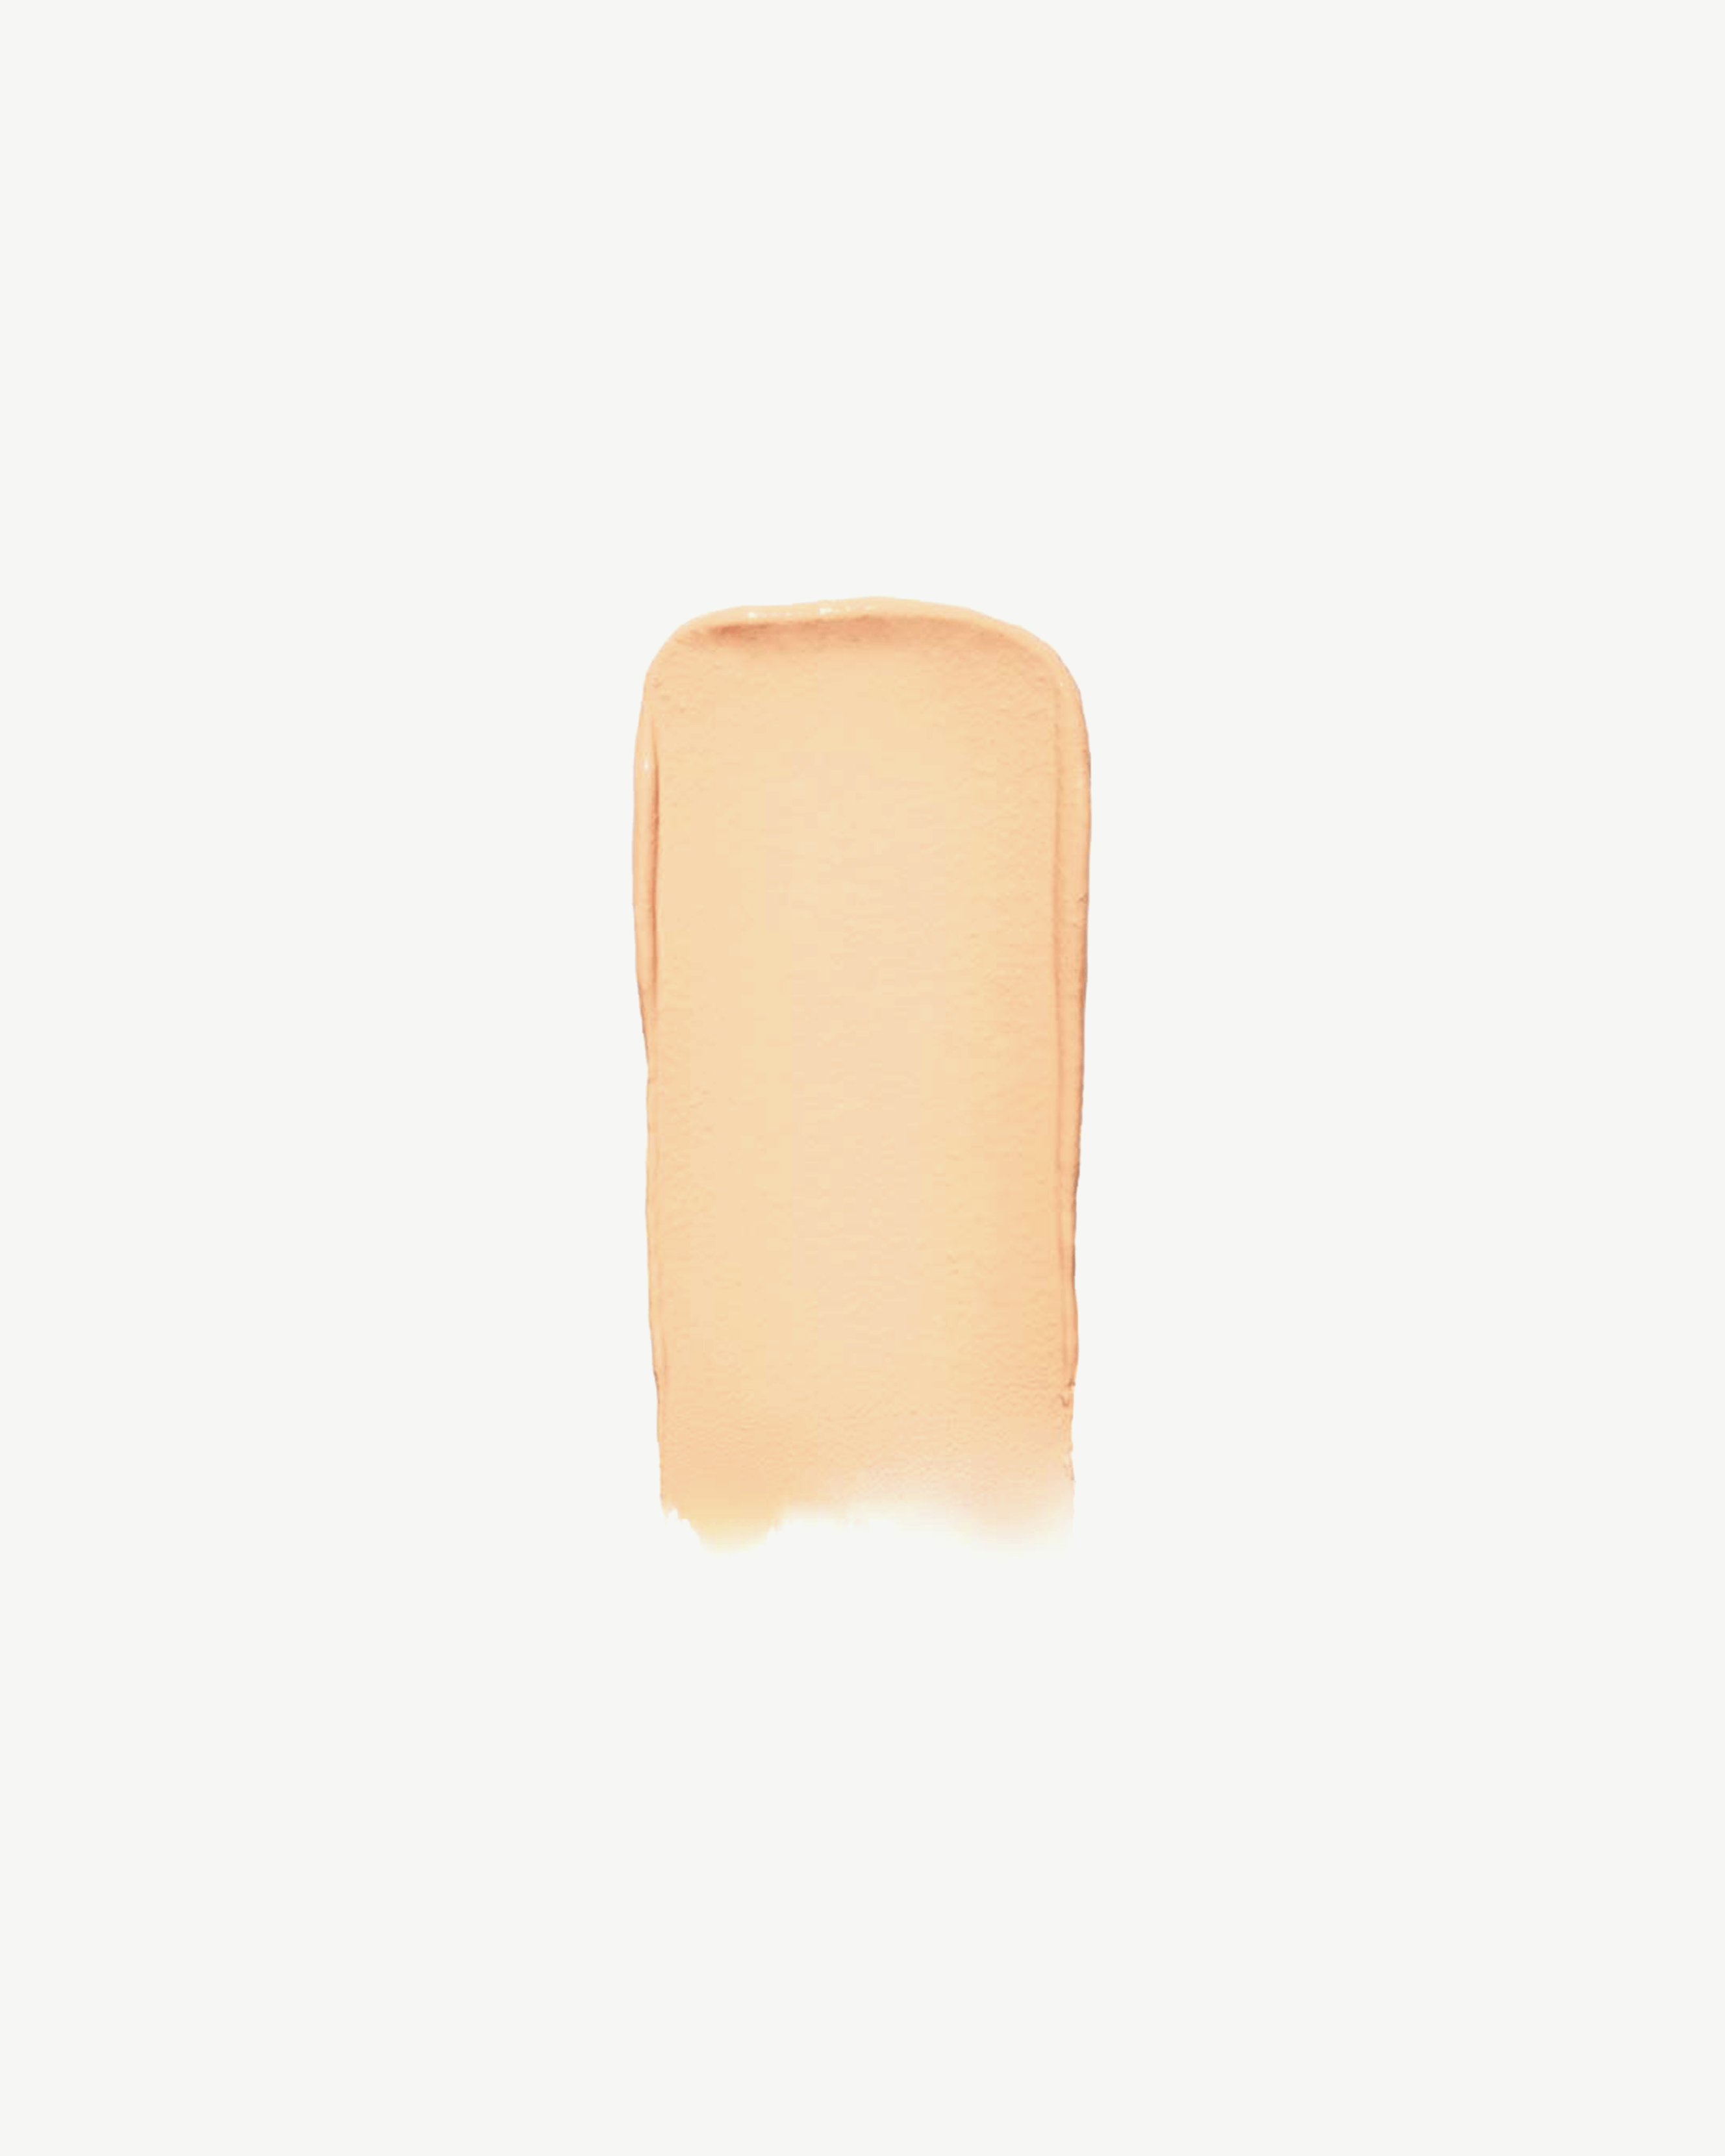 Shade 11.5 (for light skin with neutral undertones)